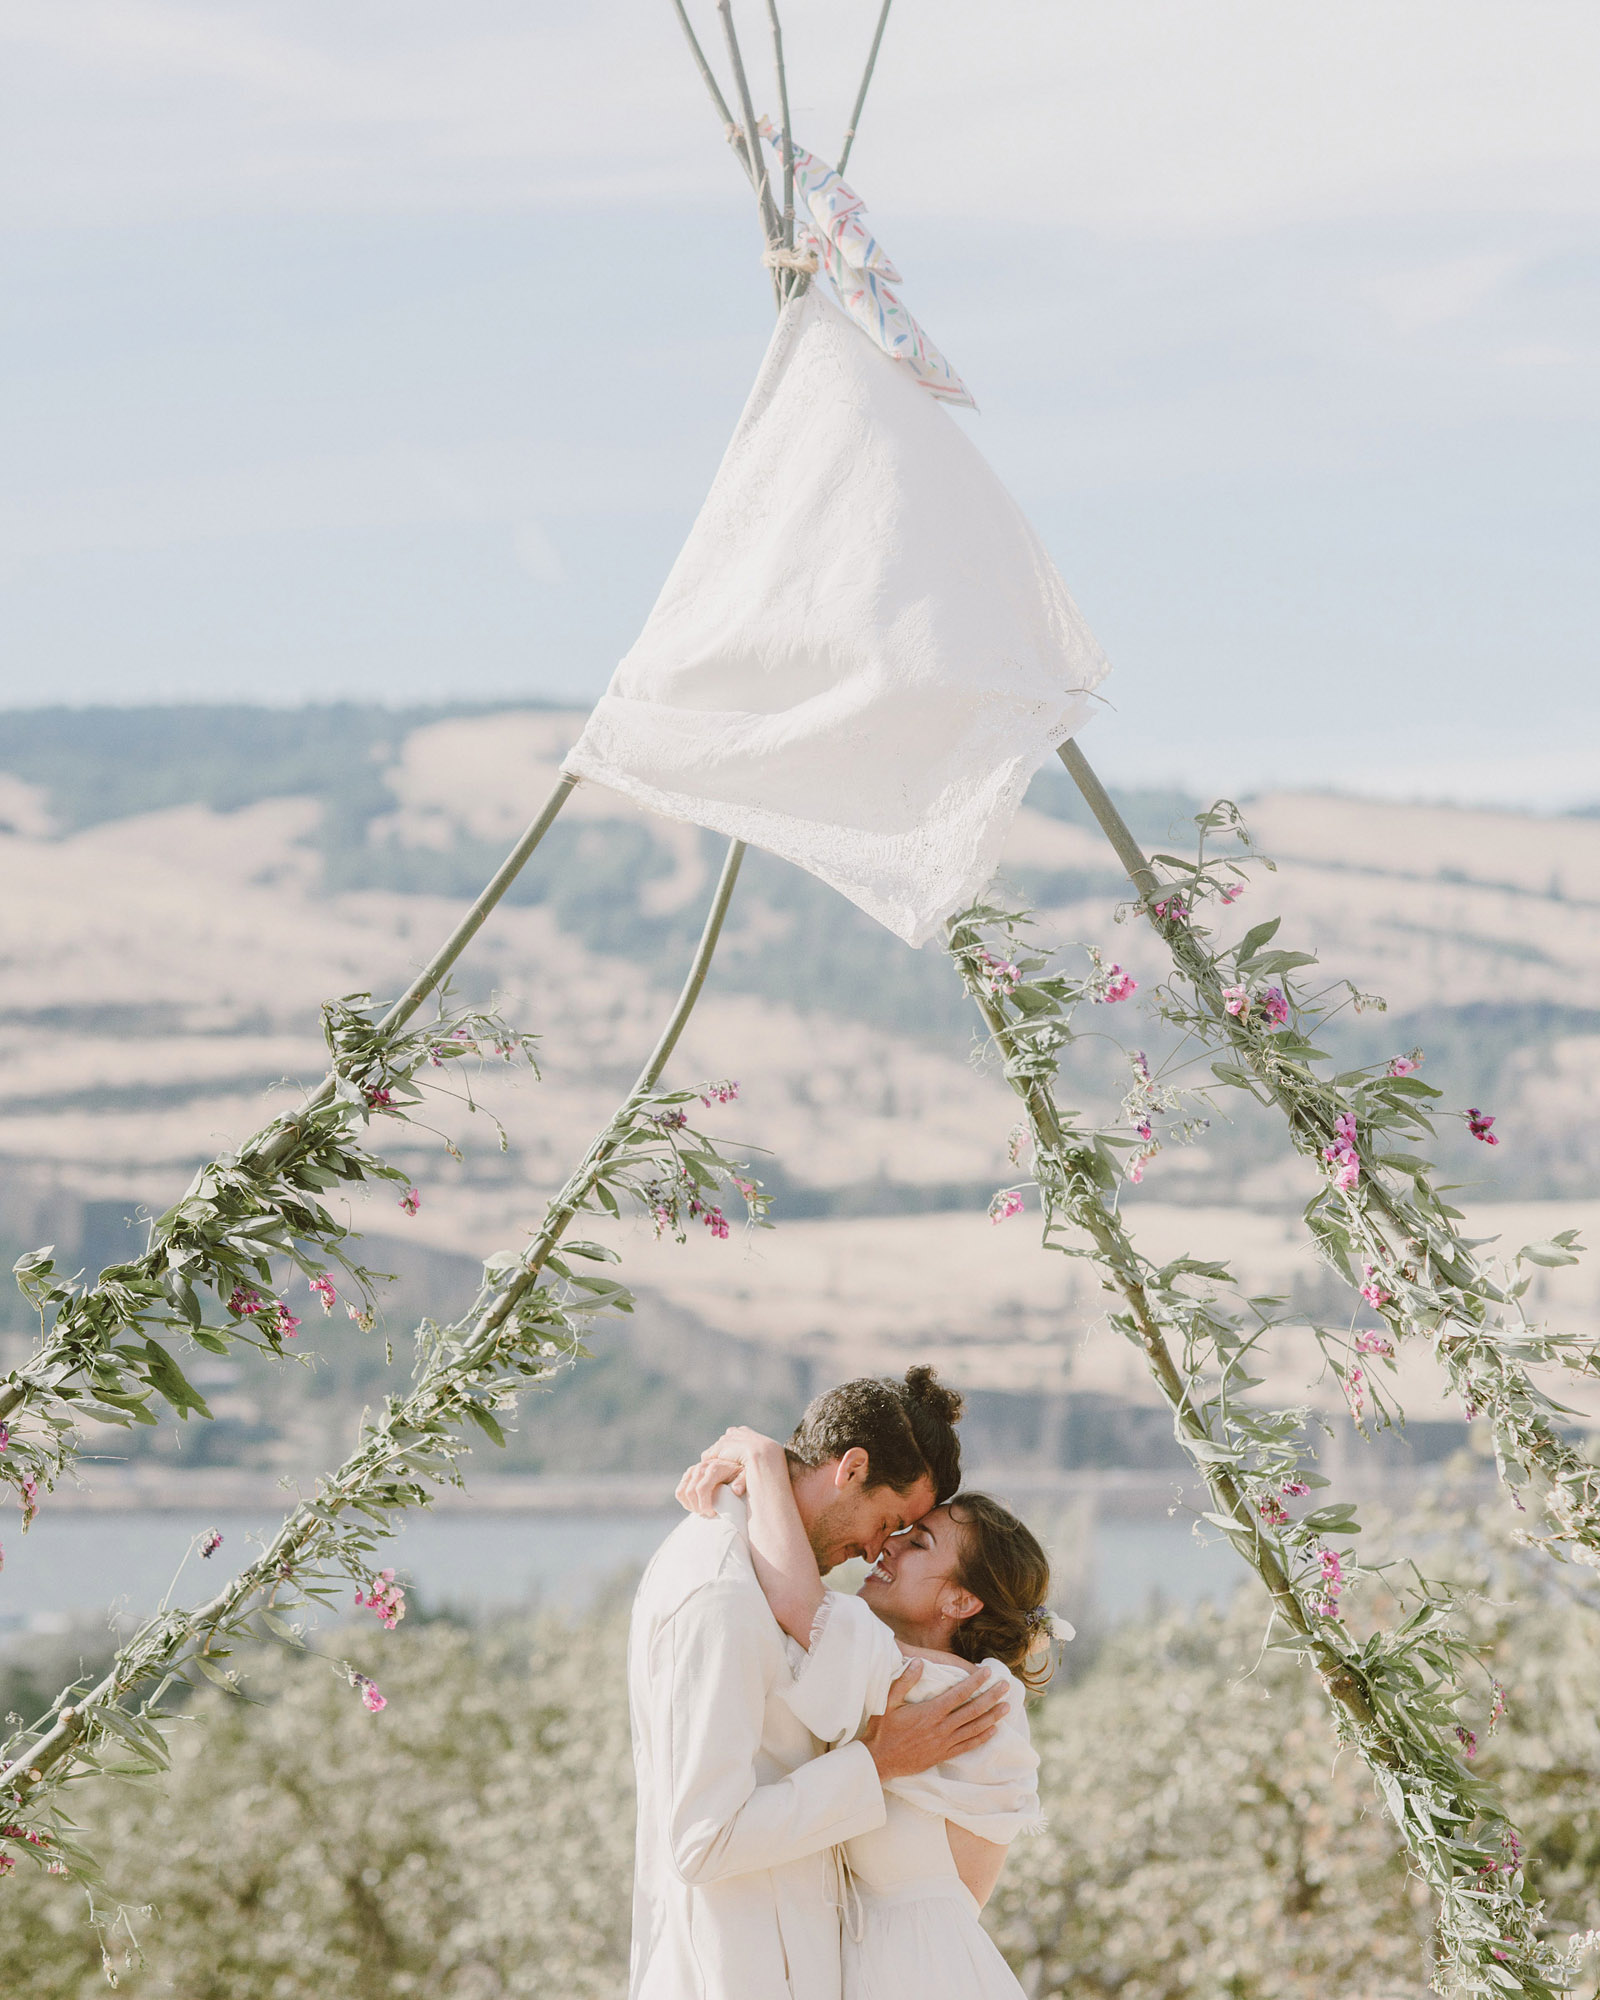 Bride and Groom's first kiss at the end of their Columbia Gorge River wedding ceremony